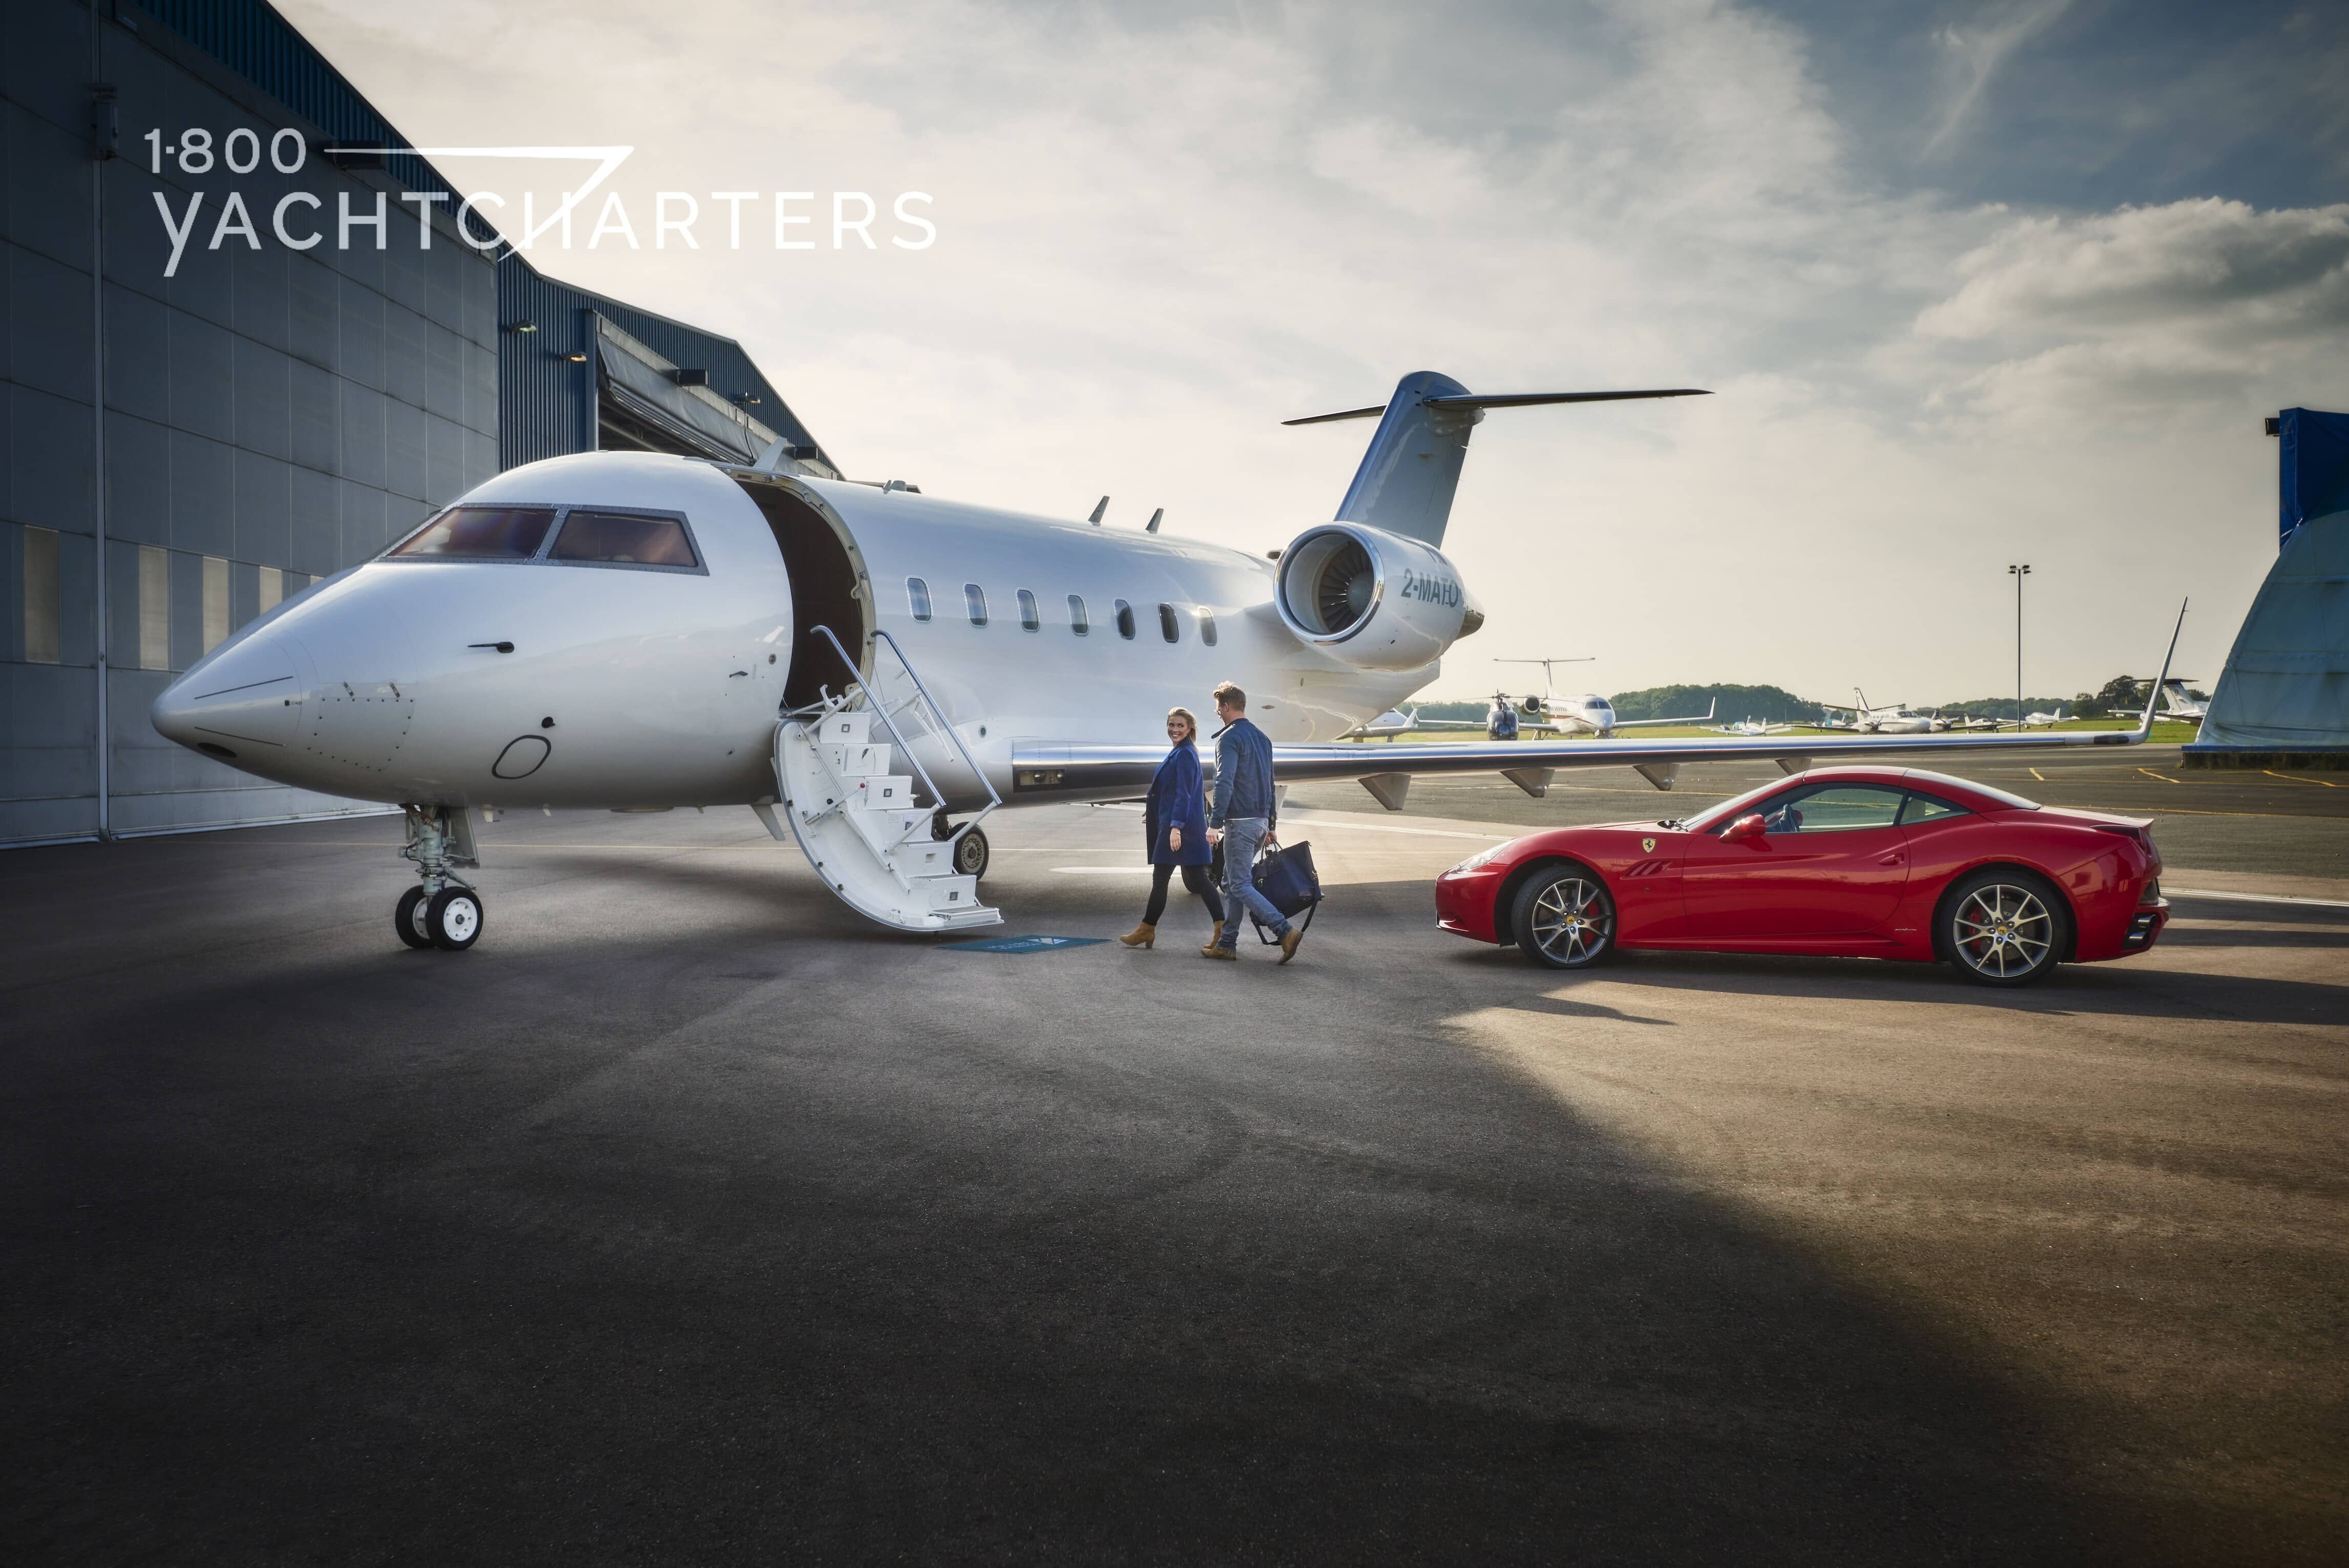 Photograph of a private jet with a red ferrari next to it. The jet is on the tarmac. The jet door is open, and the stairs are deployed. 2 men are walking up to the jet.